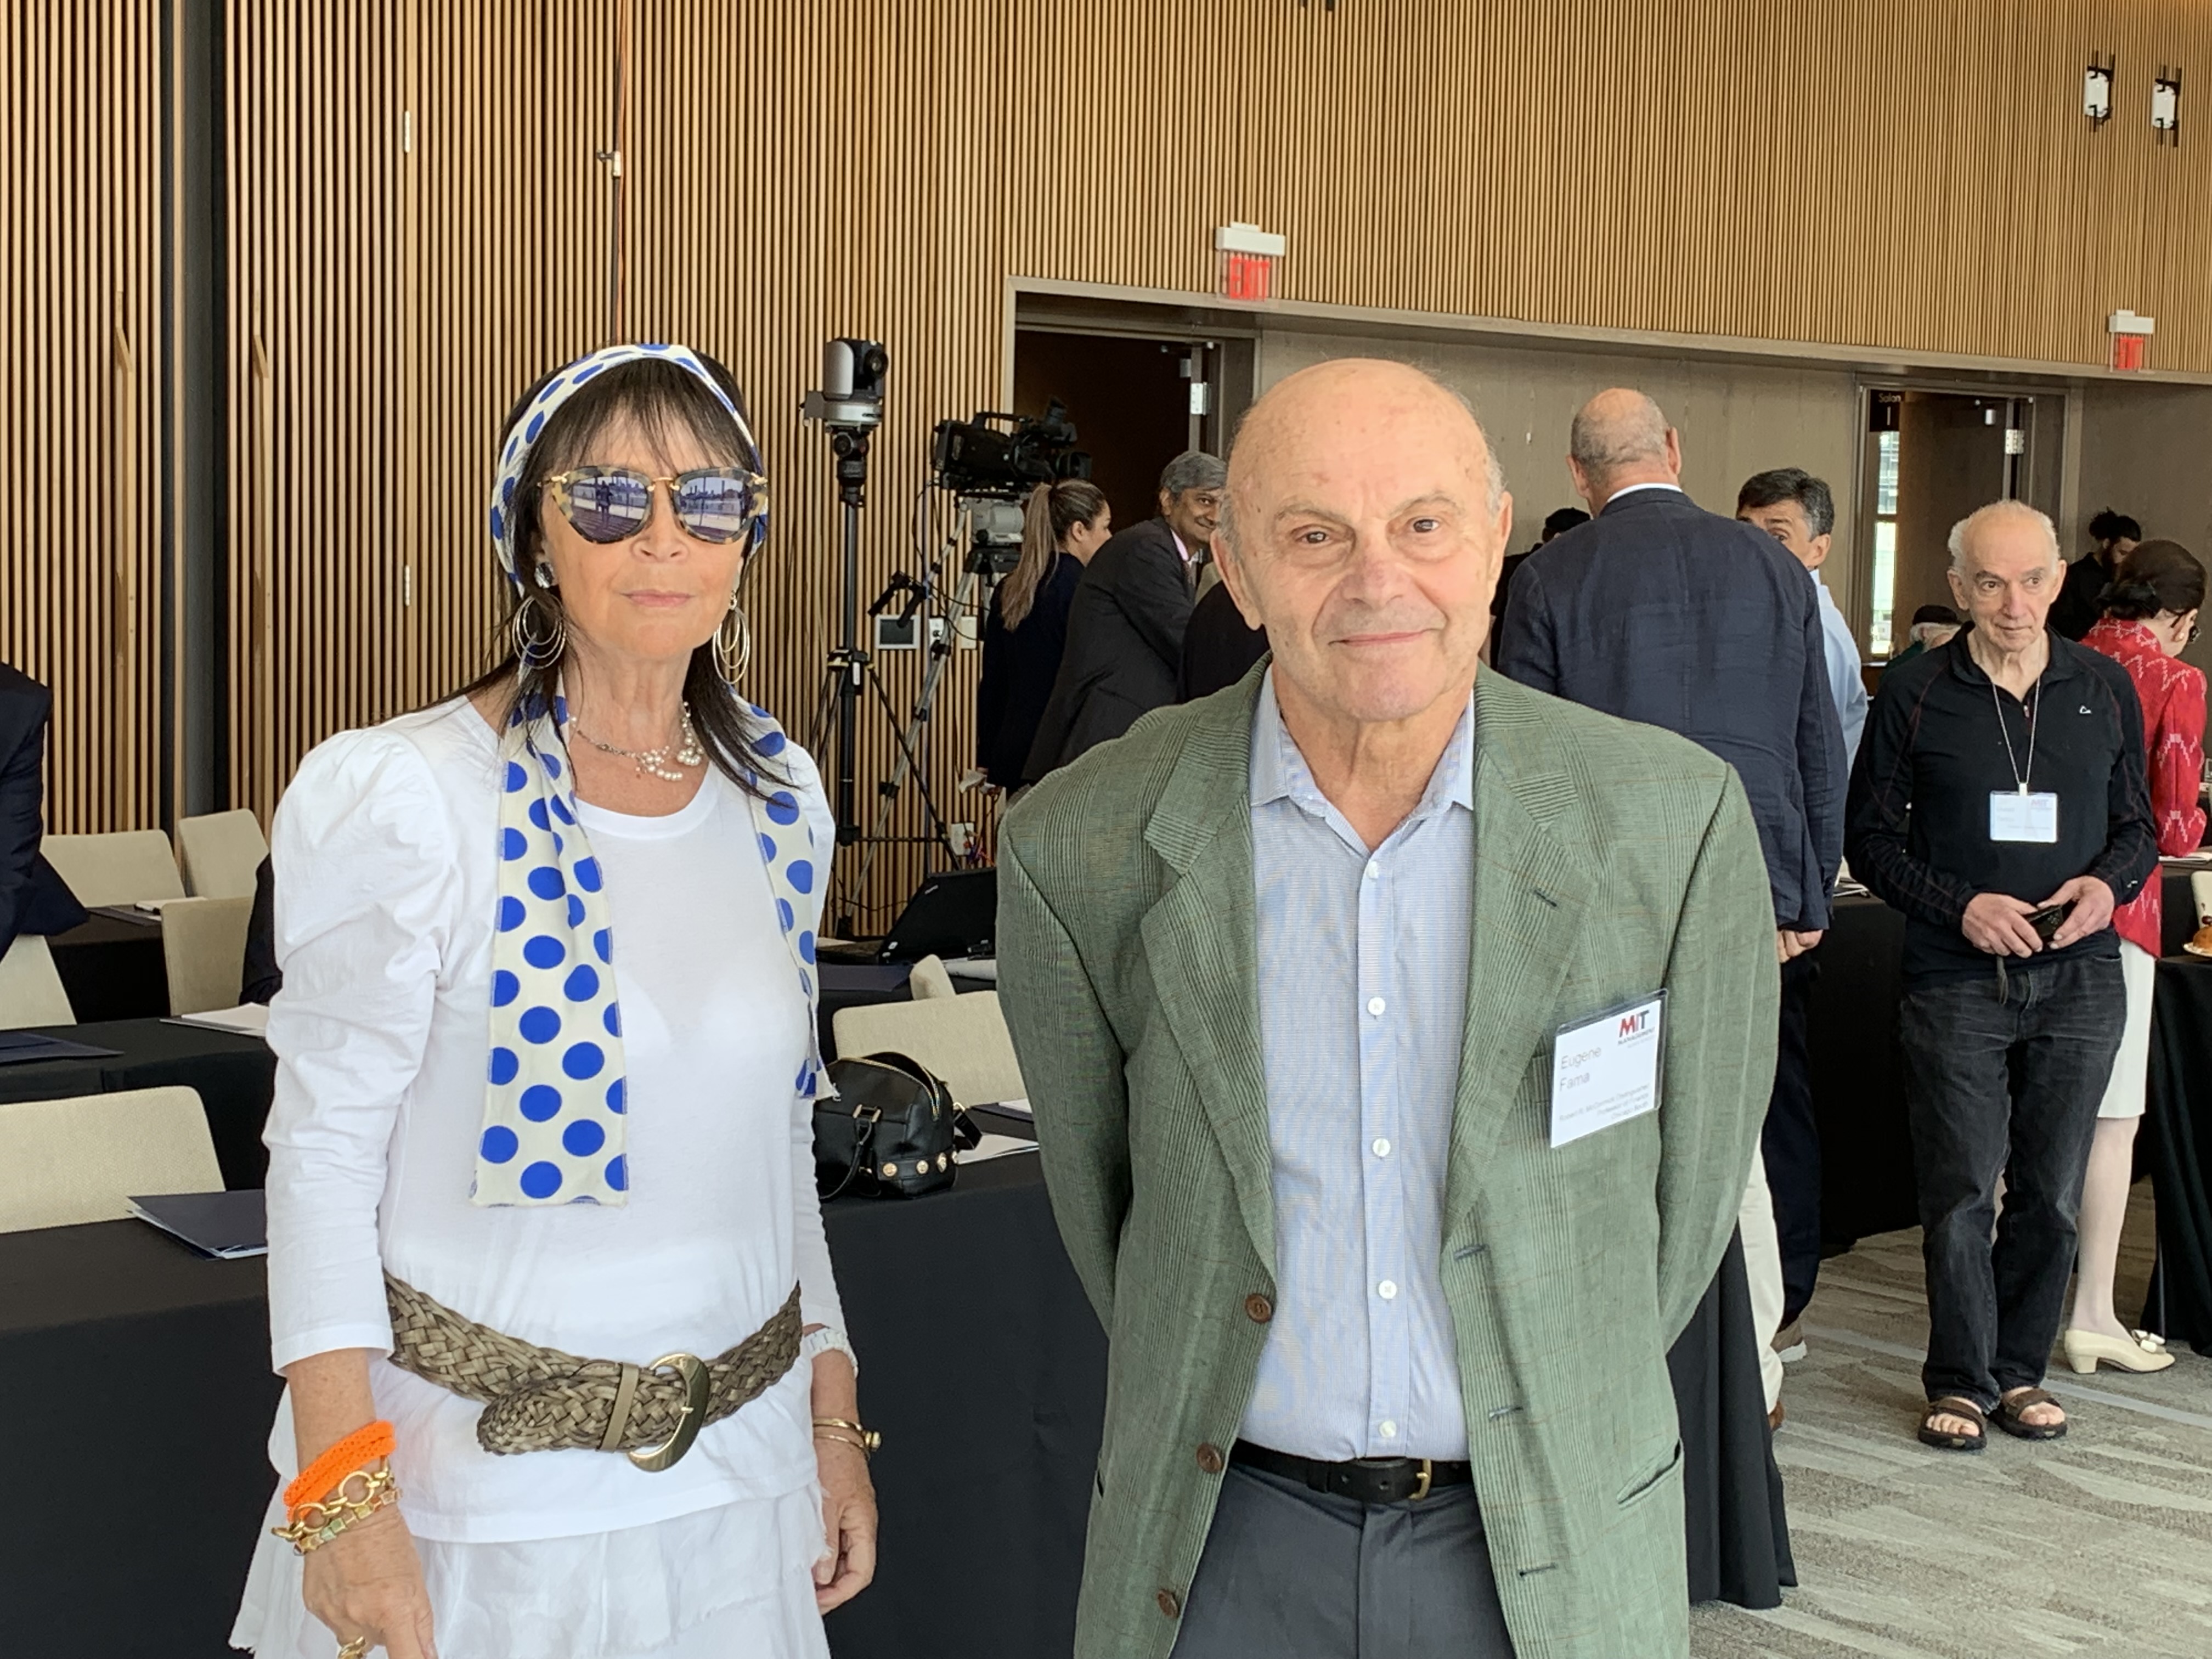 Helyette Geman with Prof Fama at MIT for the 75th birthday of Robert Merton